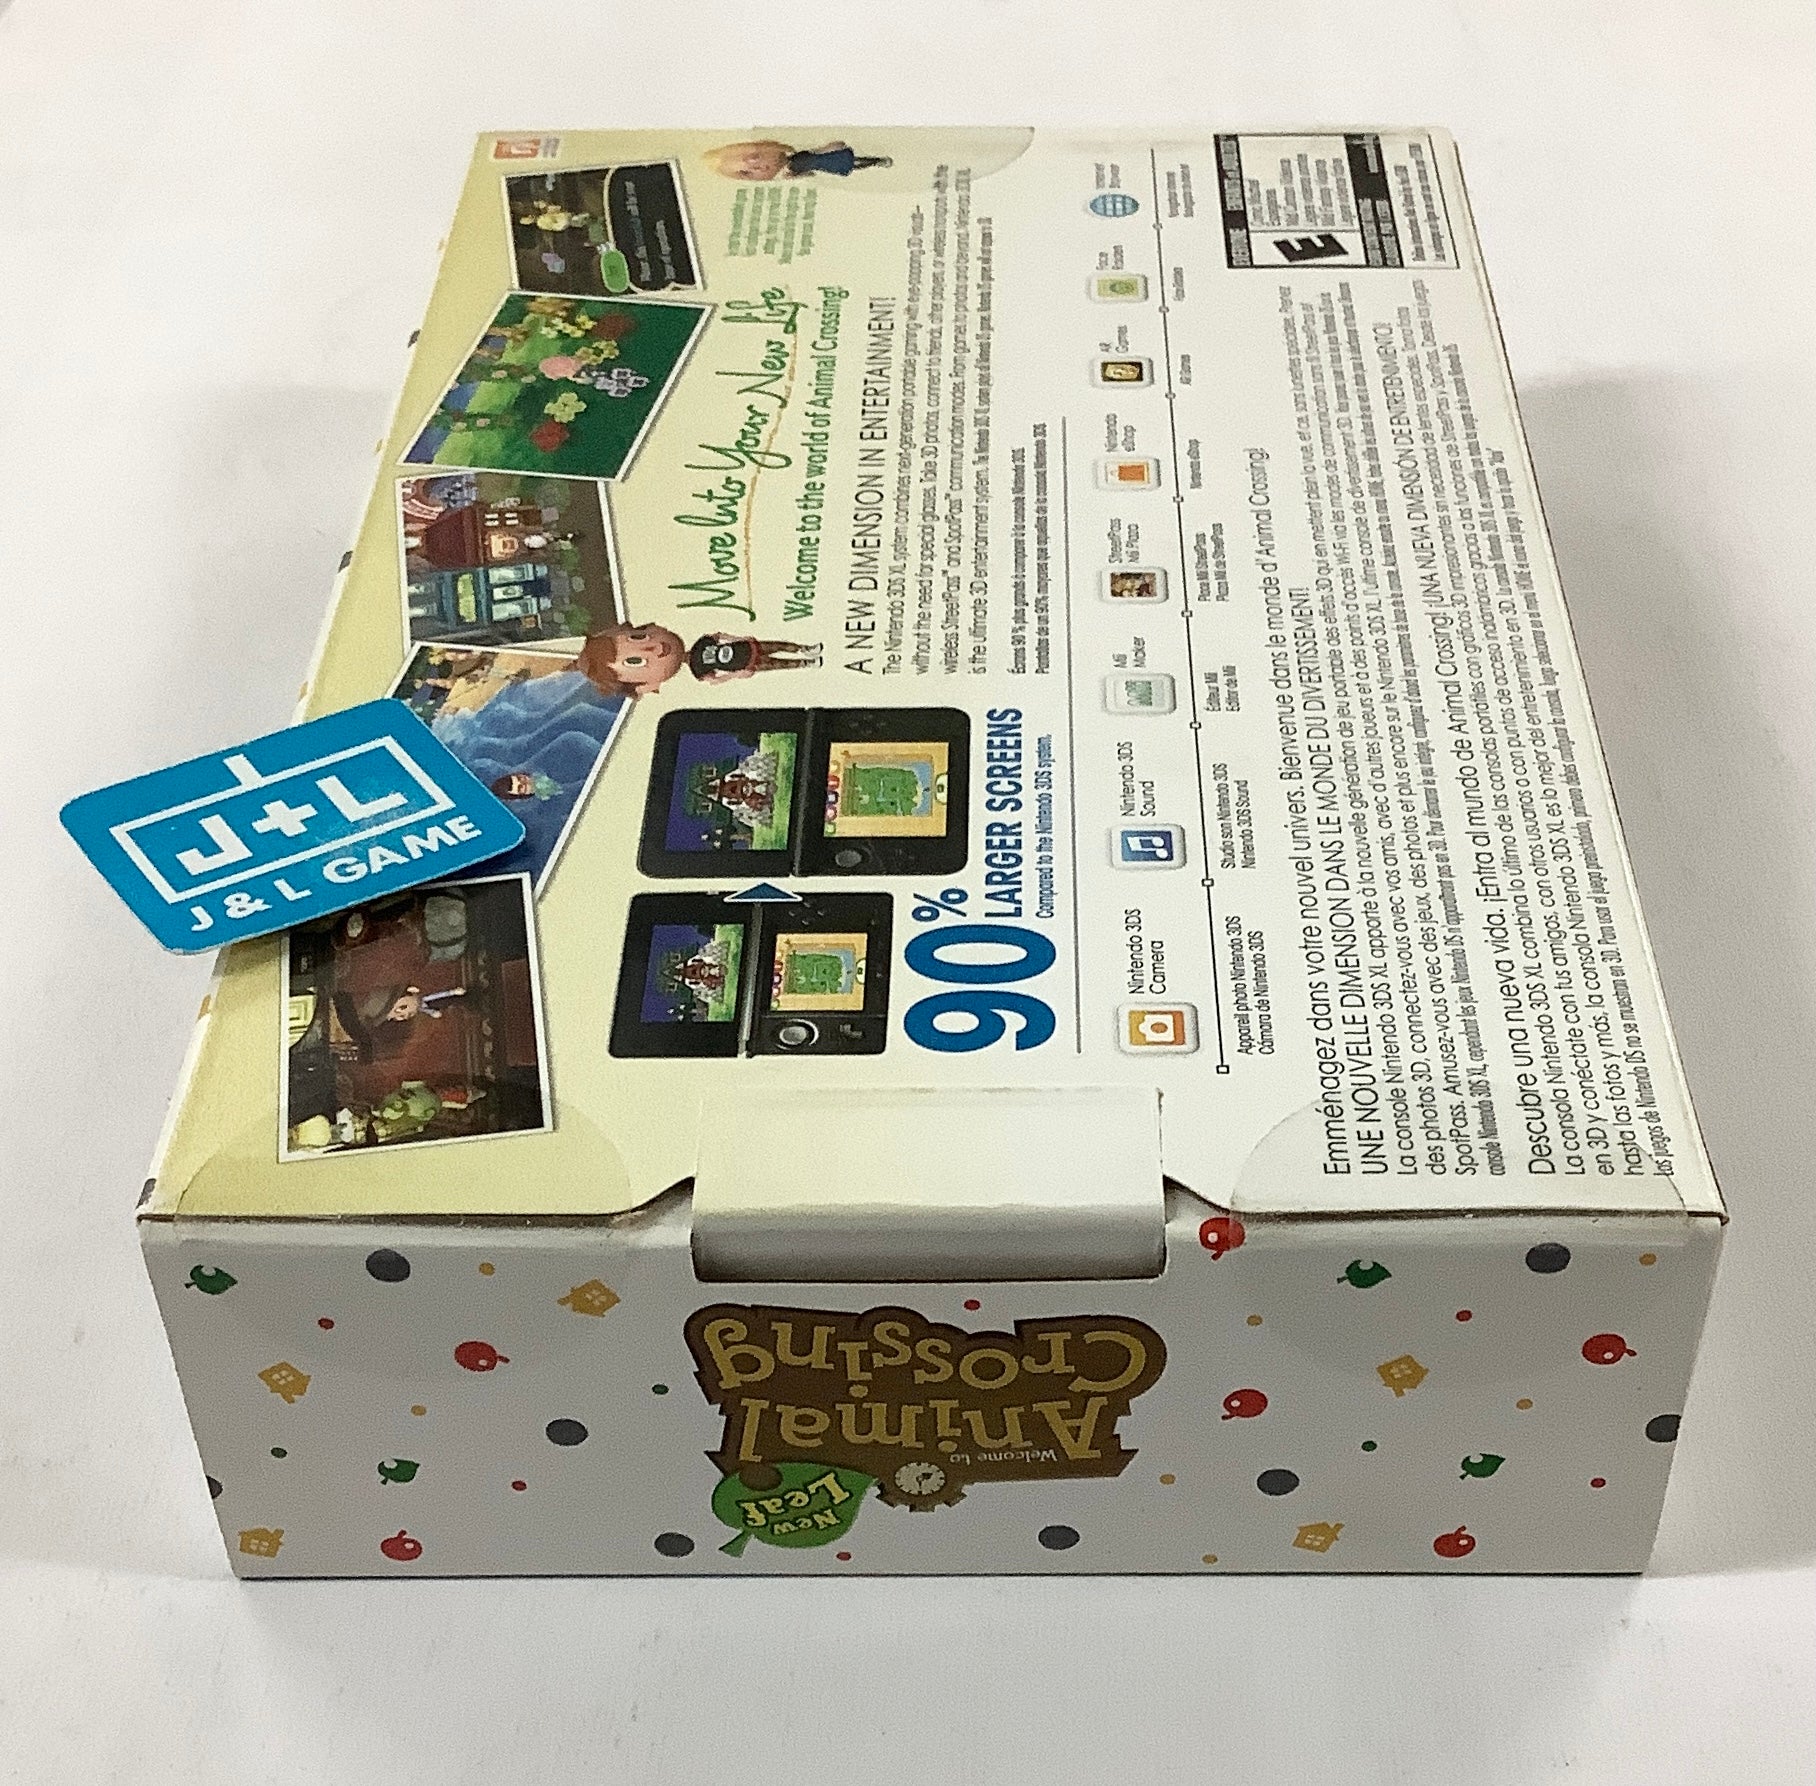 Nintendo 3DS XL Console with Animal Crossing Game Pre-Installed - Nintendo 3DS Consoles Nintendo   